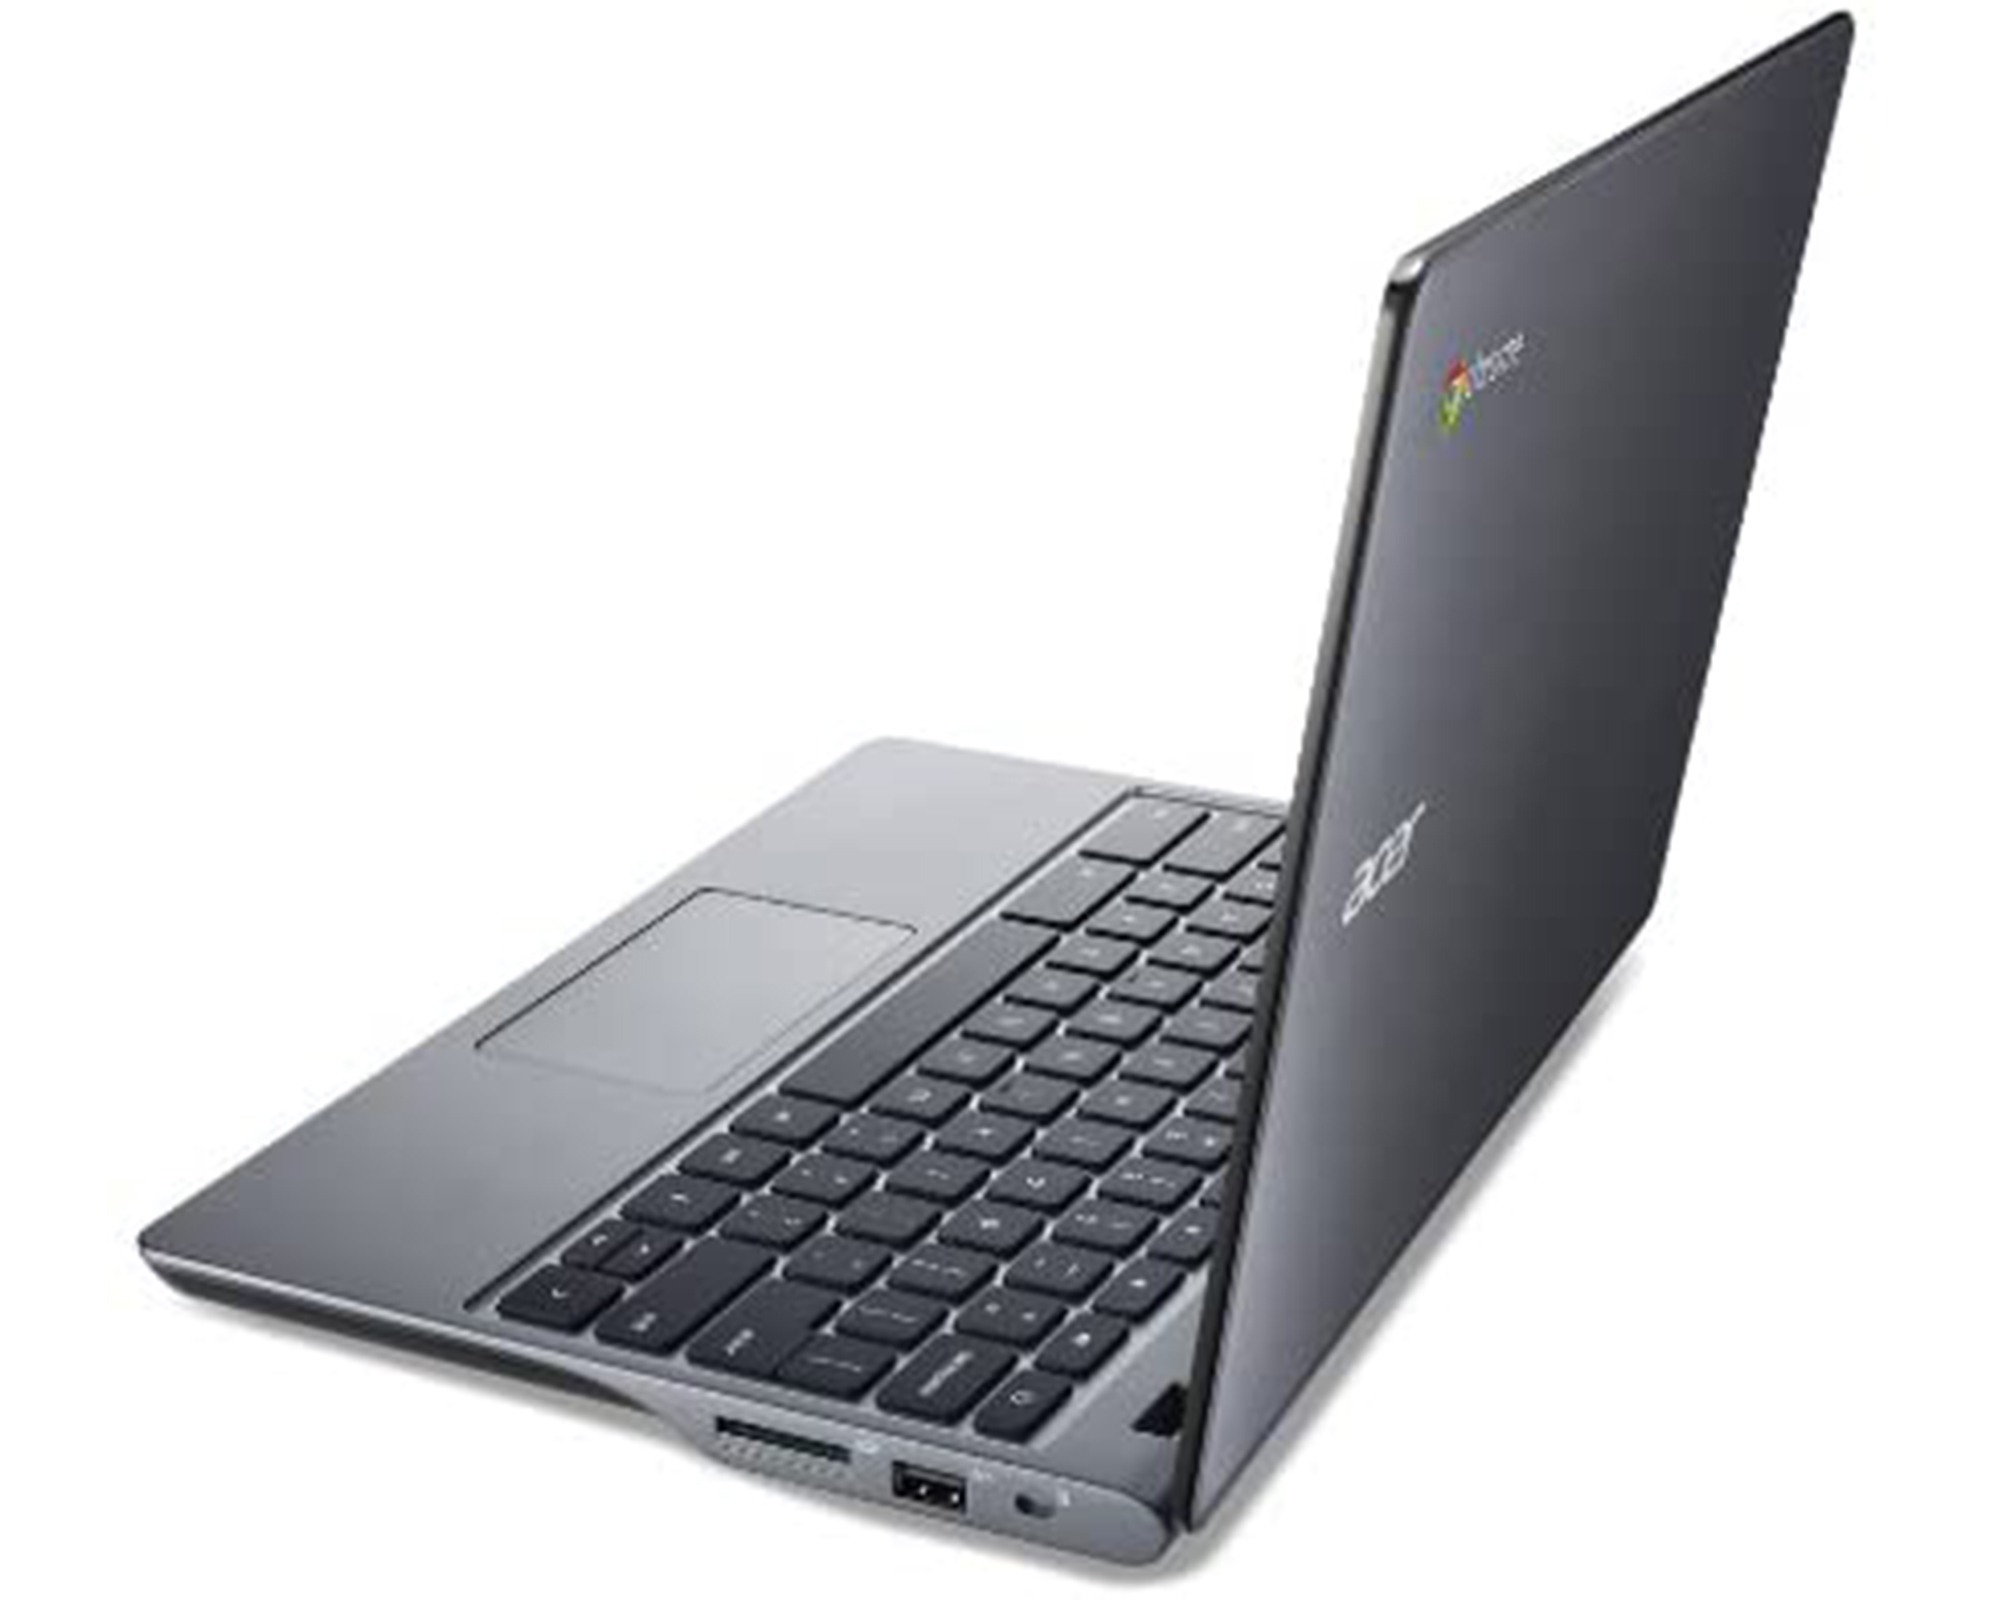 Restored Details about Acer C720-2103 11.6 in chromebook, Intel Celeron 1.4GHz 2GB Ram - image 4 of 8